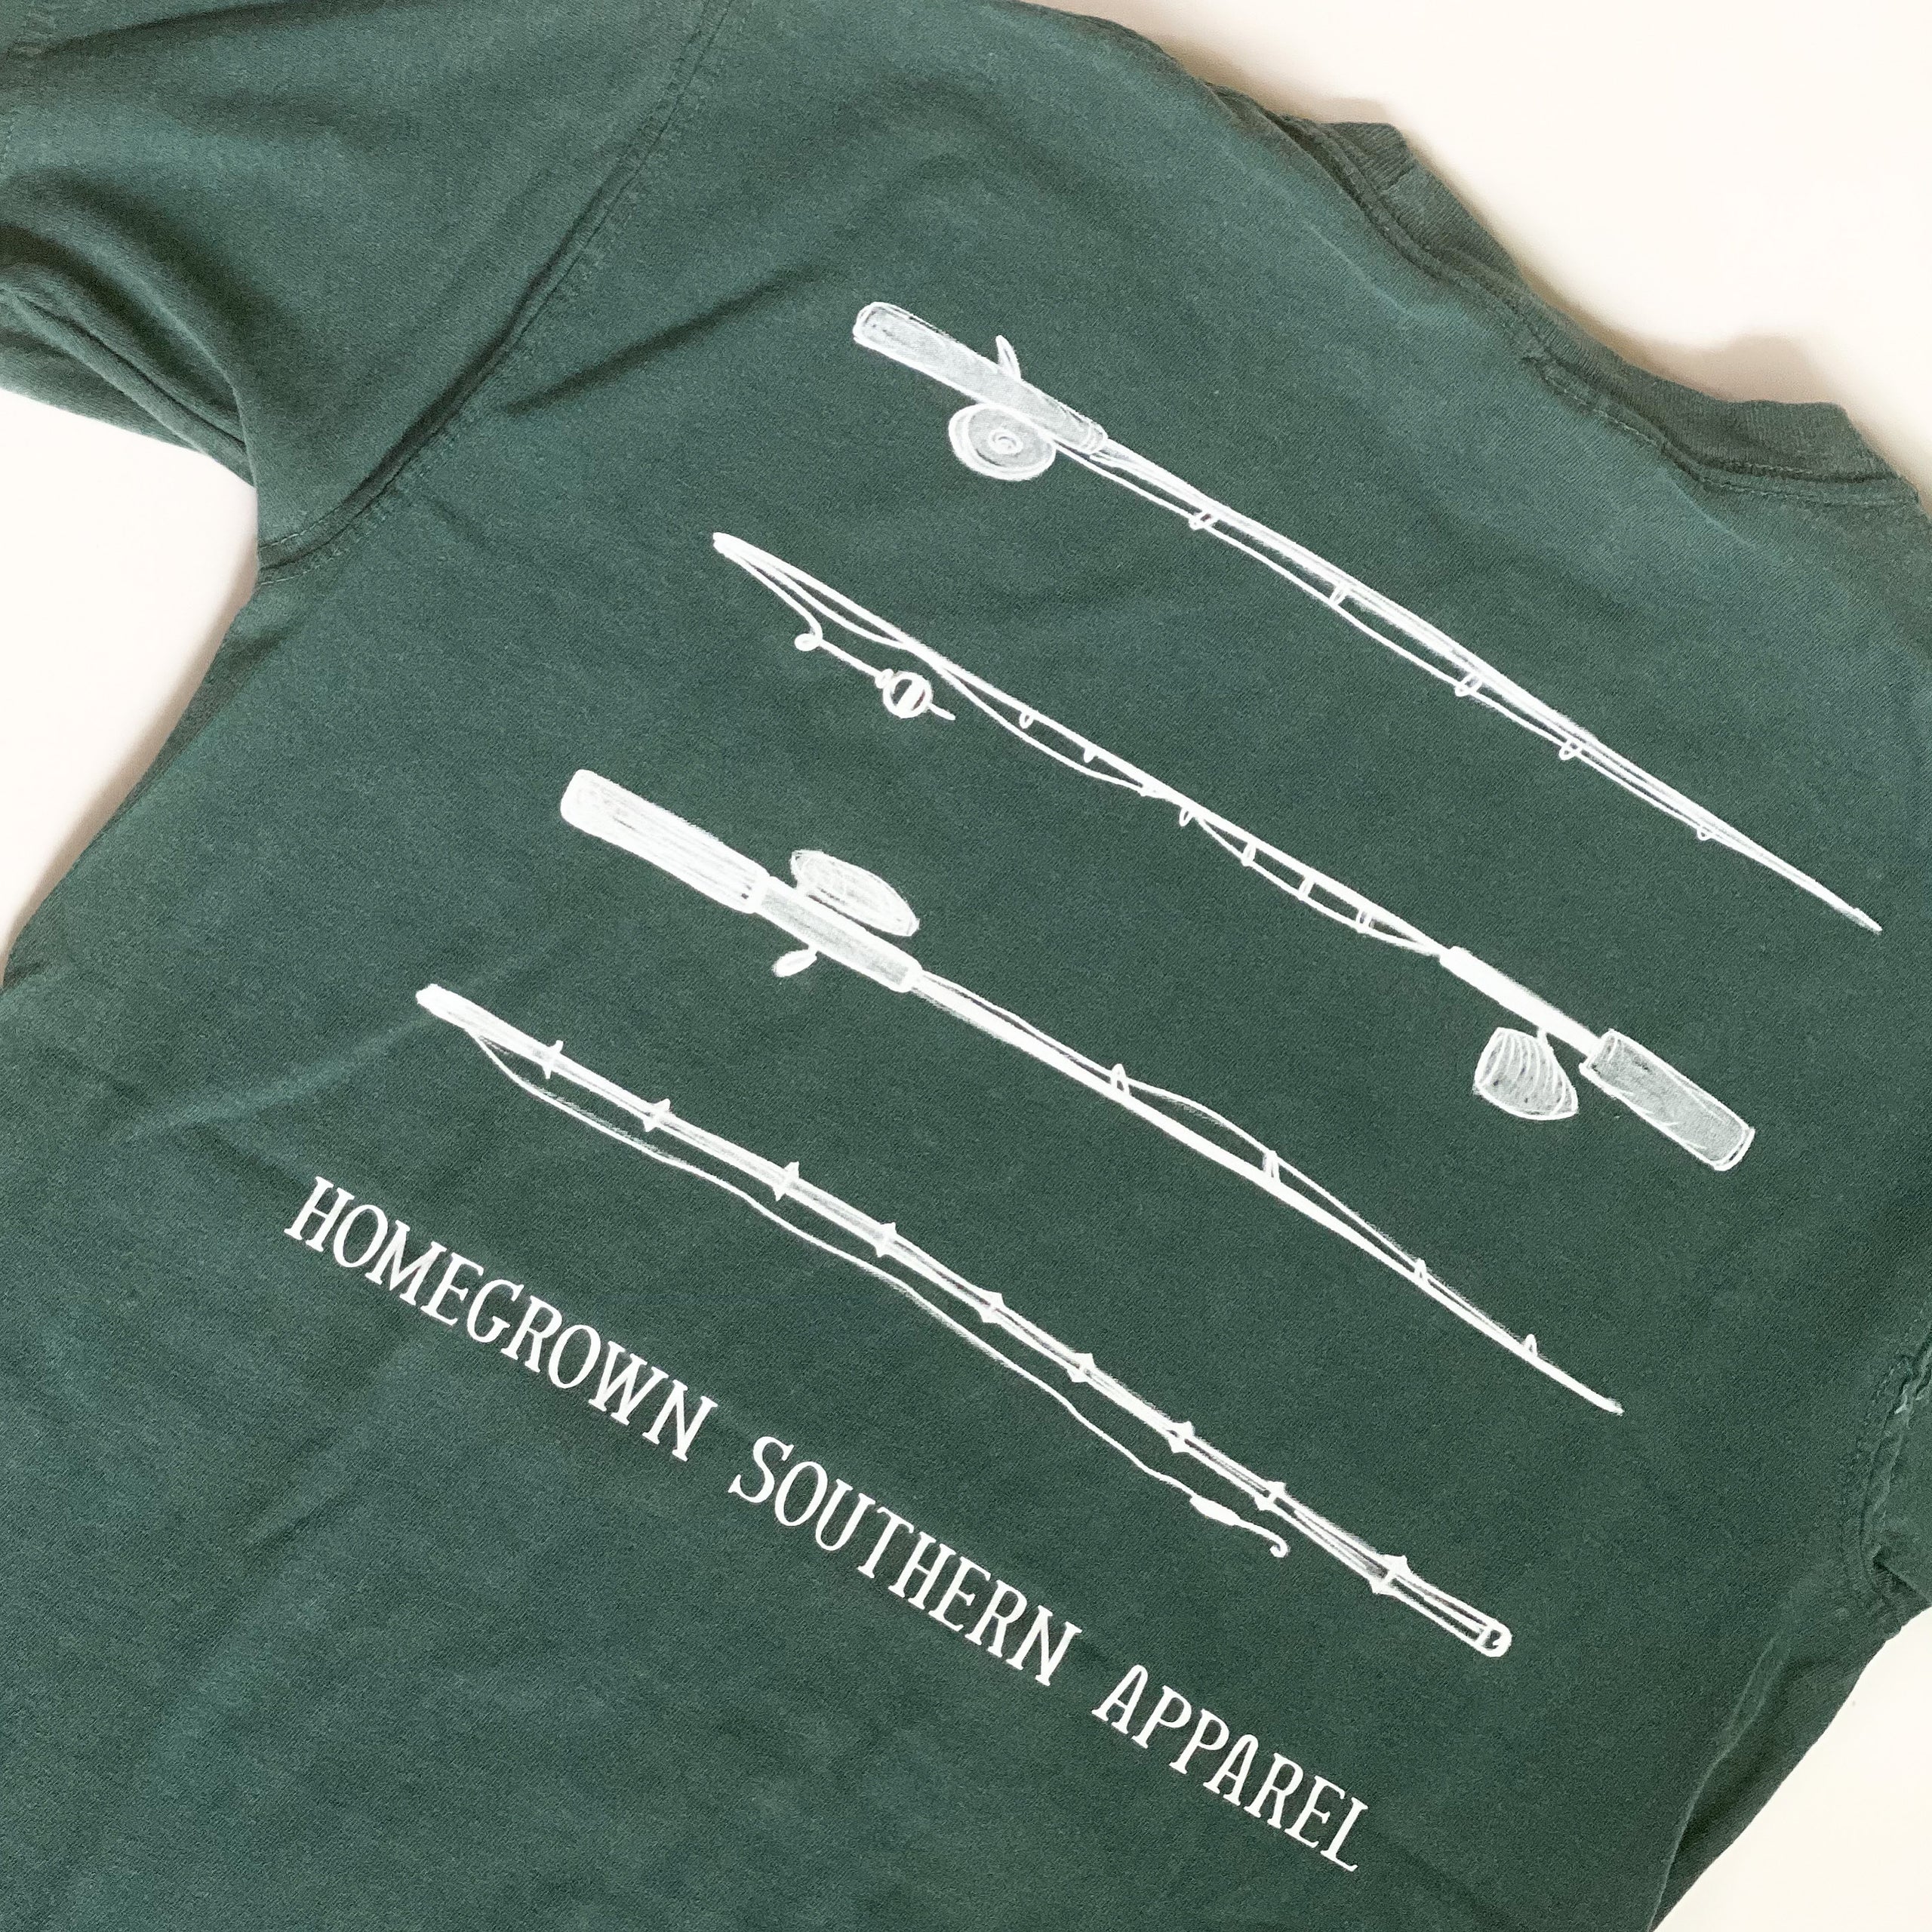 Spring Fishing Tee  Homegrown Southern Apparel